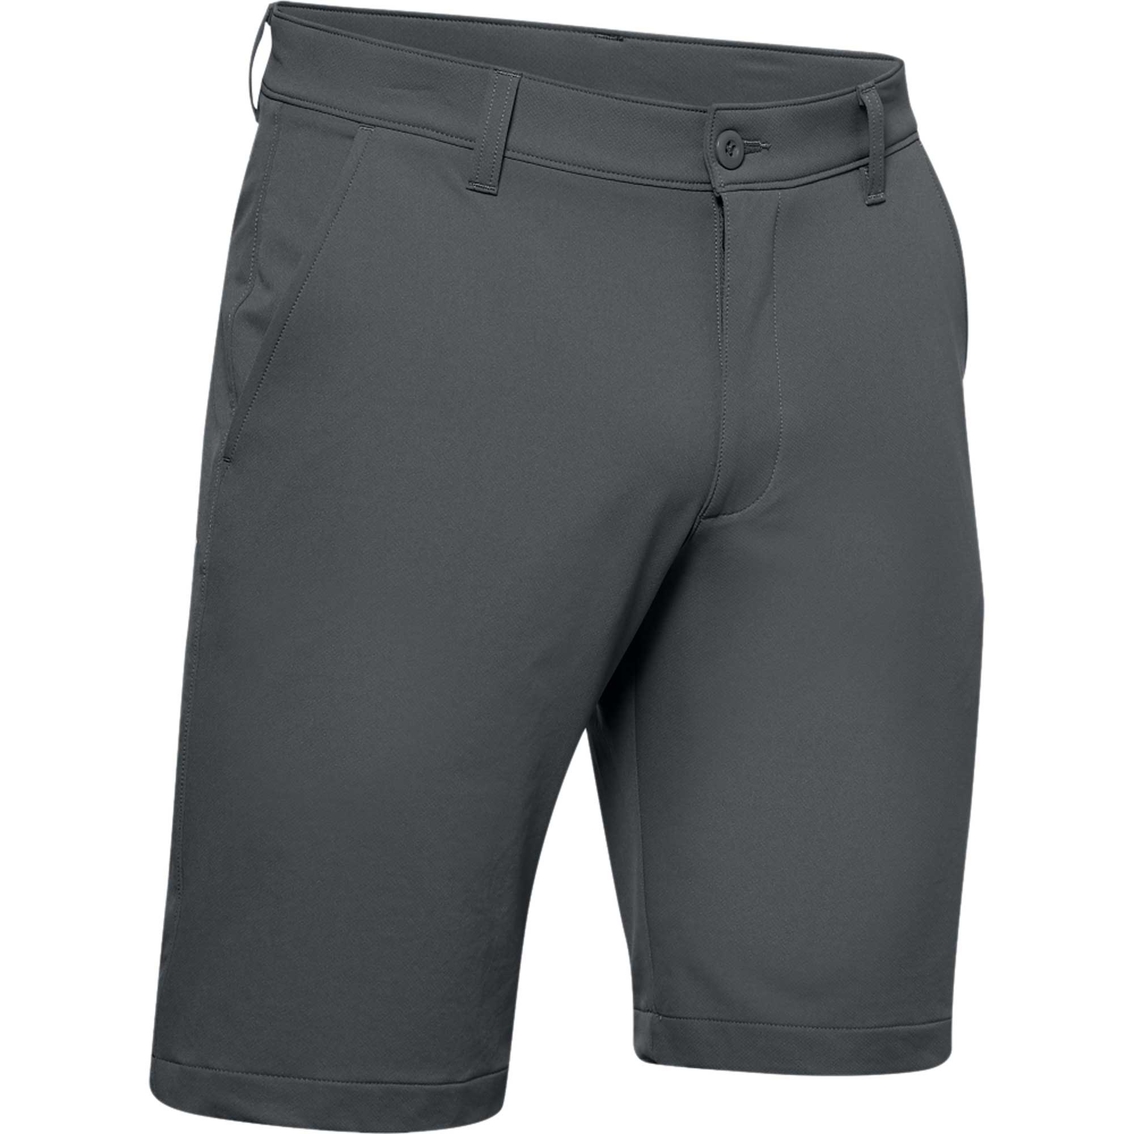 Under Armour 10 in. Tech Shorts - Image 7 of 8